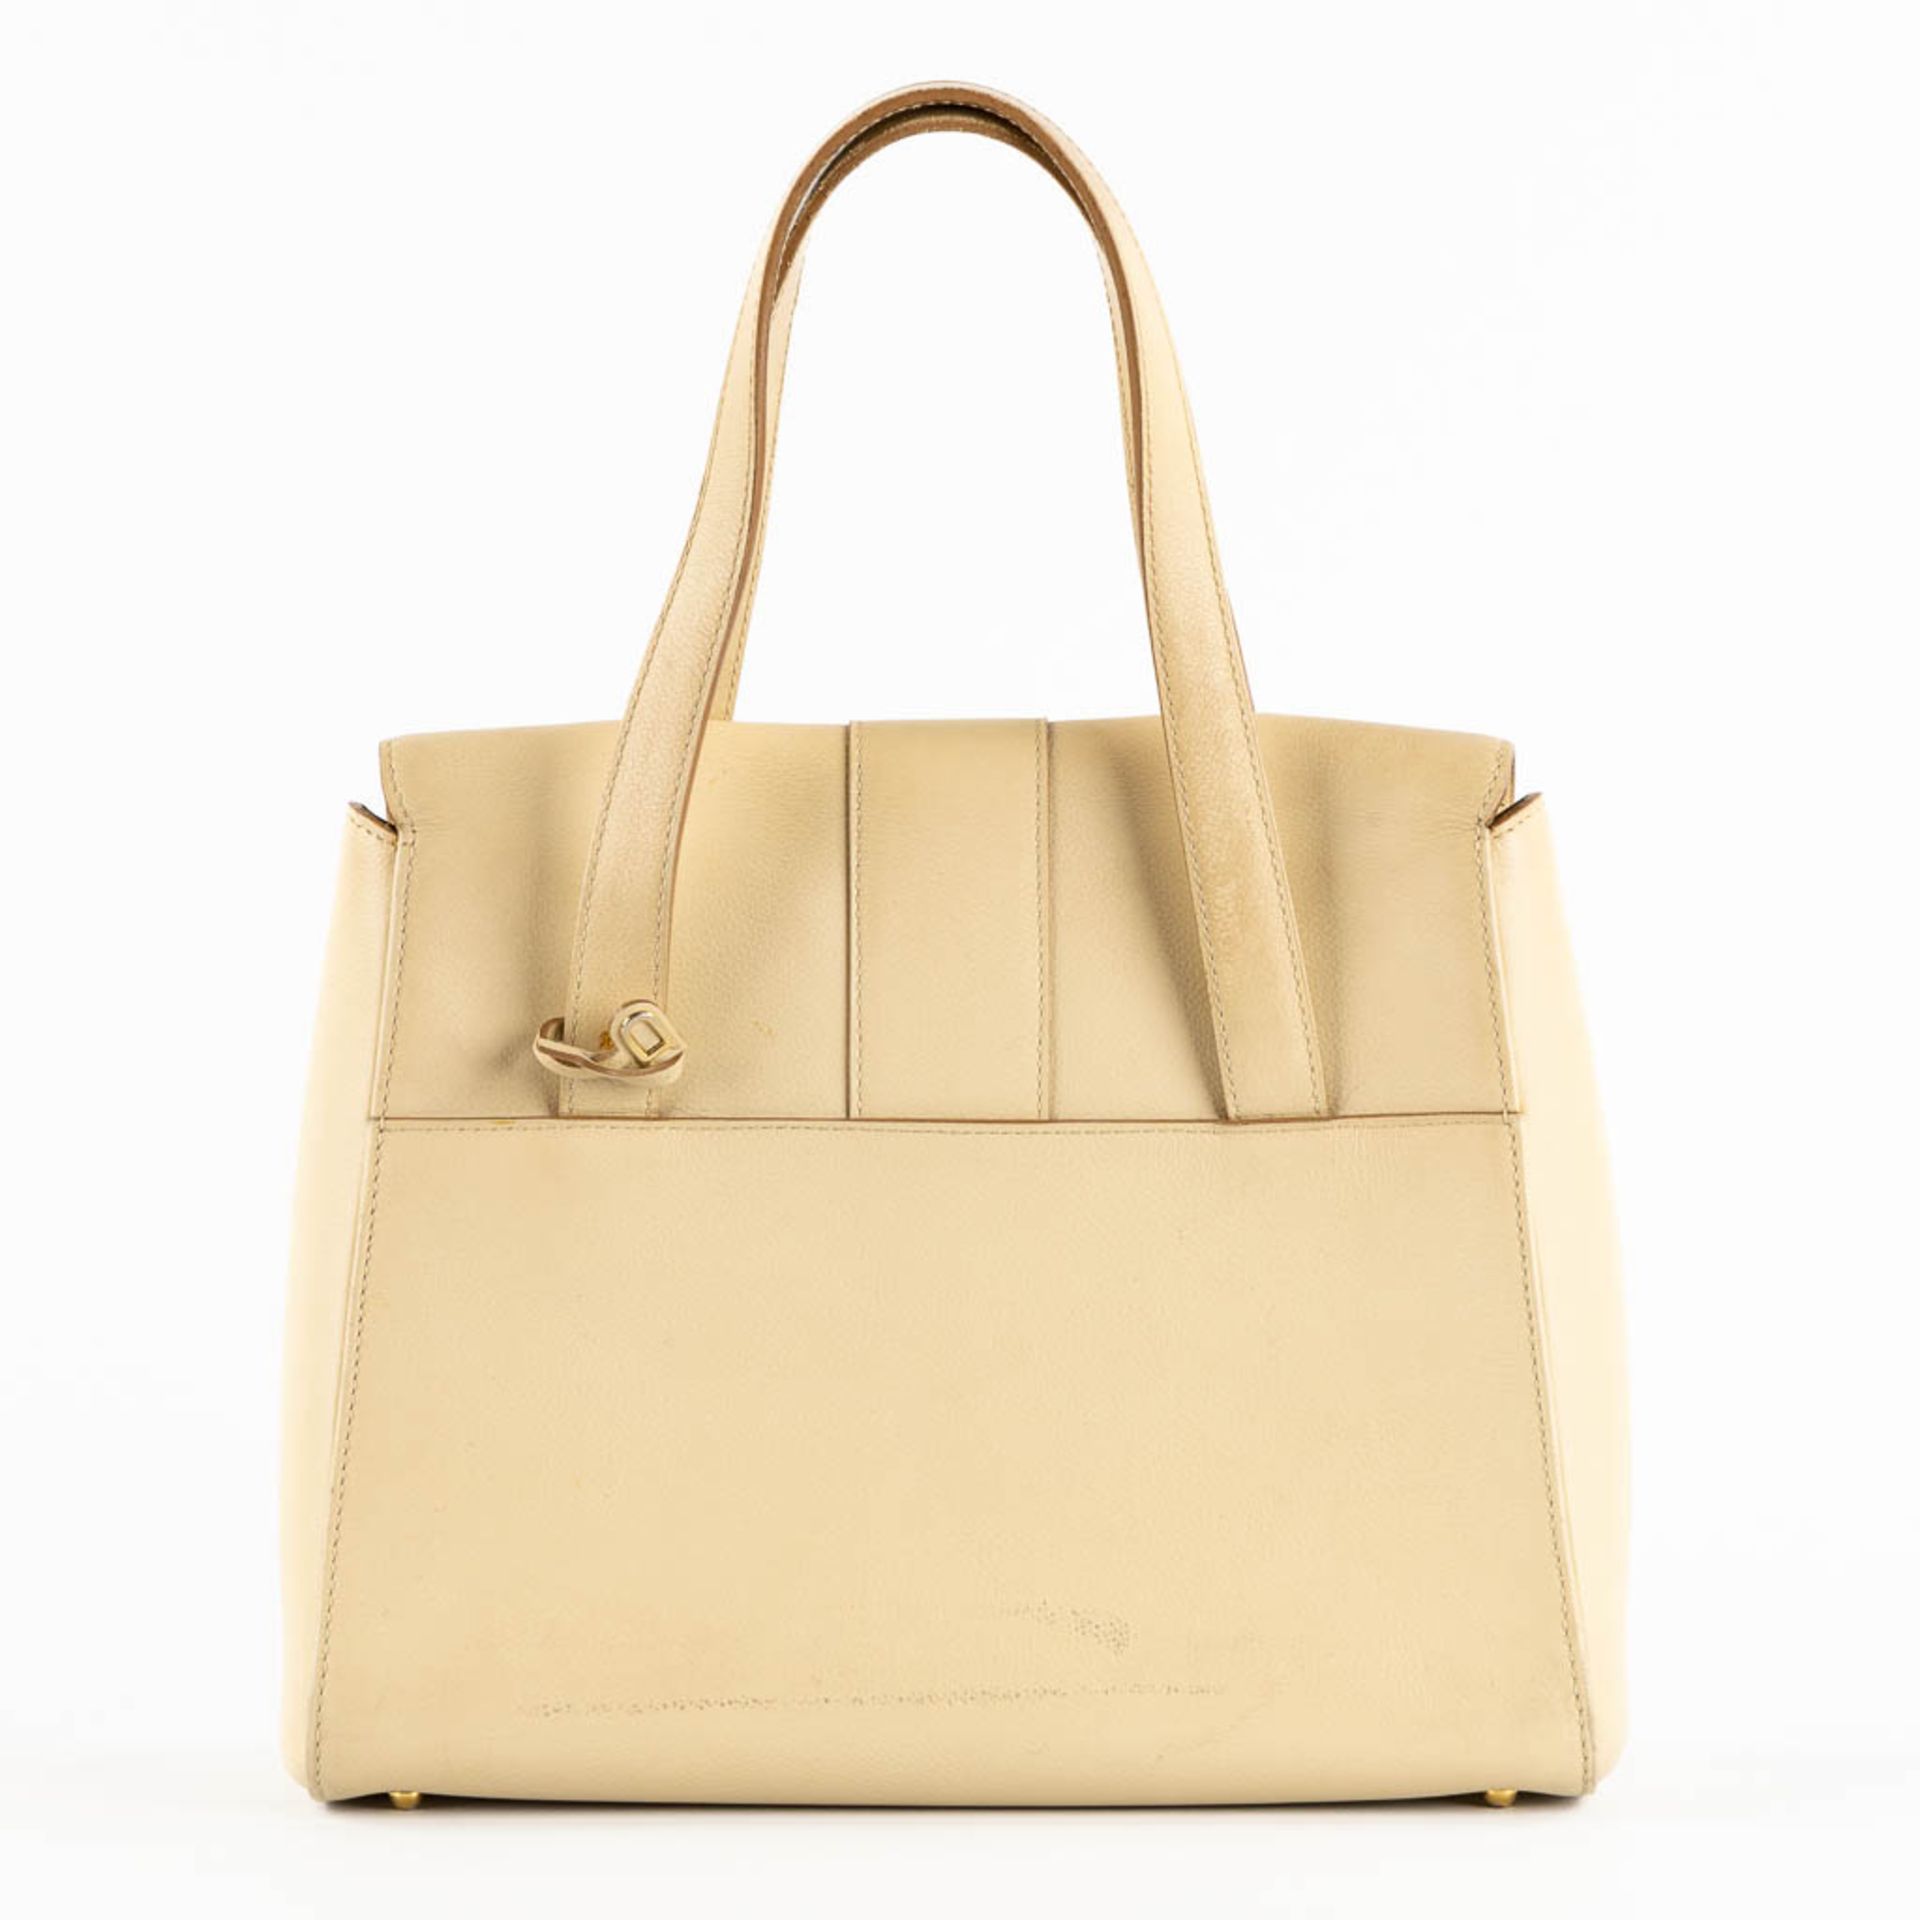 Delvaux model 'Reverie' Jumping, Ivoire. Ivory coloured leather. (L:11 x W:28 x H:23 cm) - Image 6 of 20